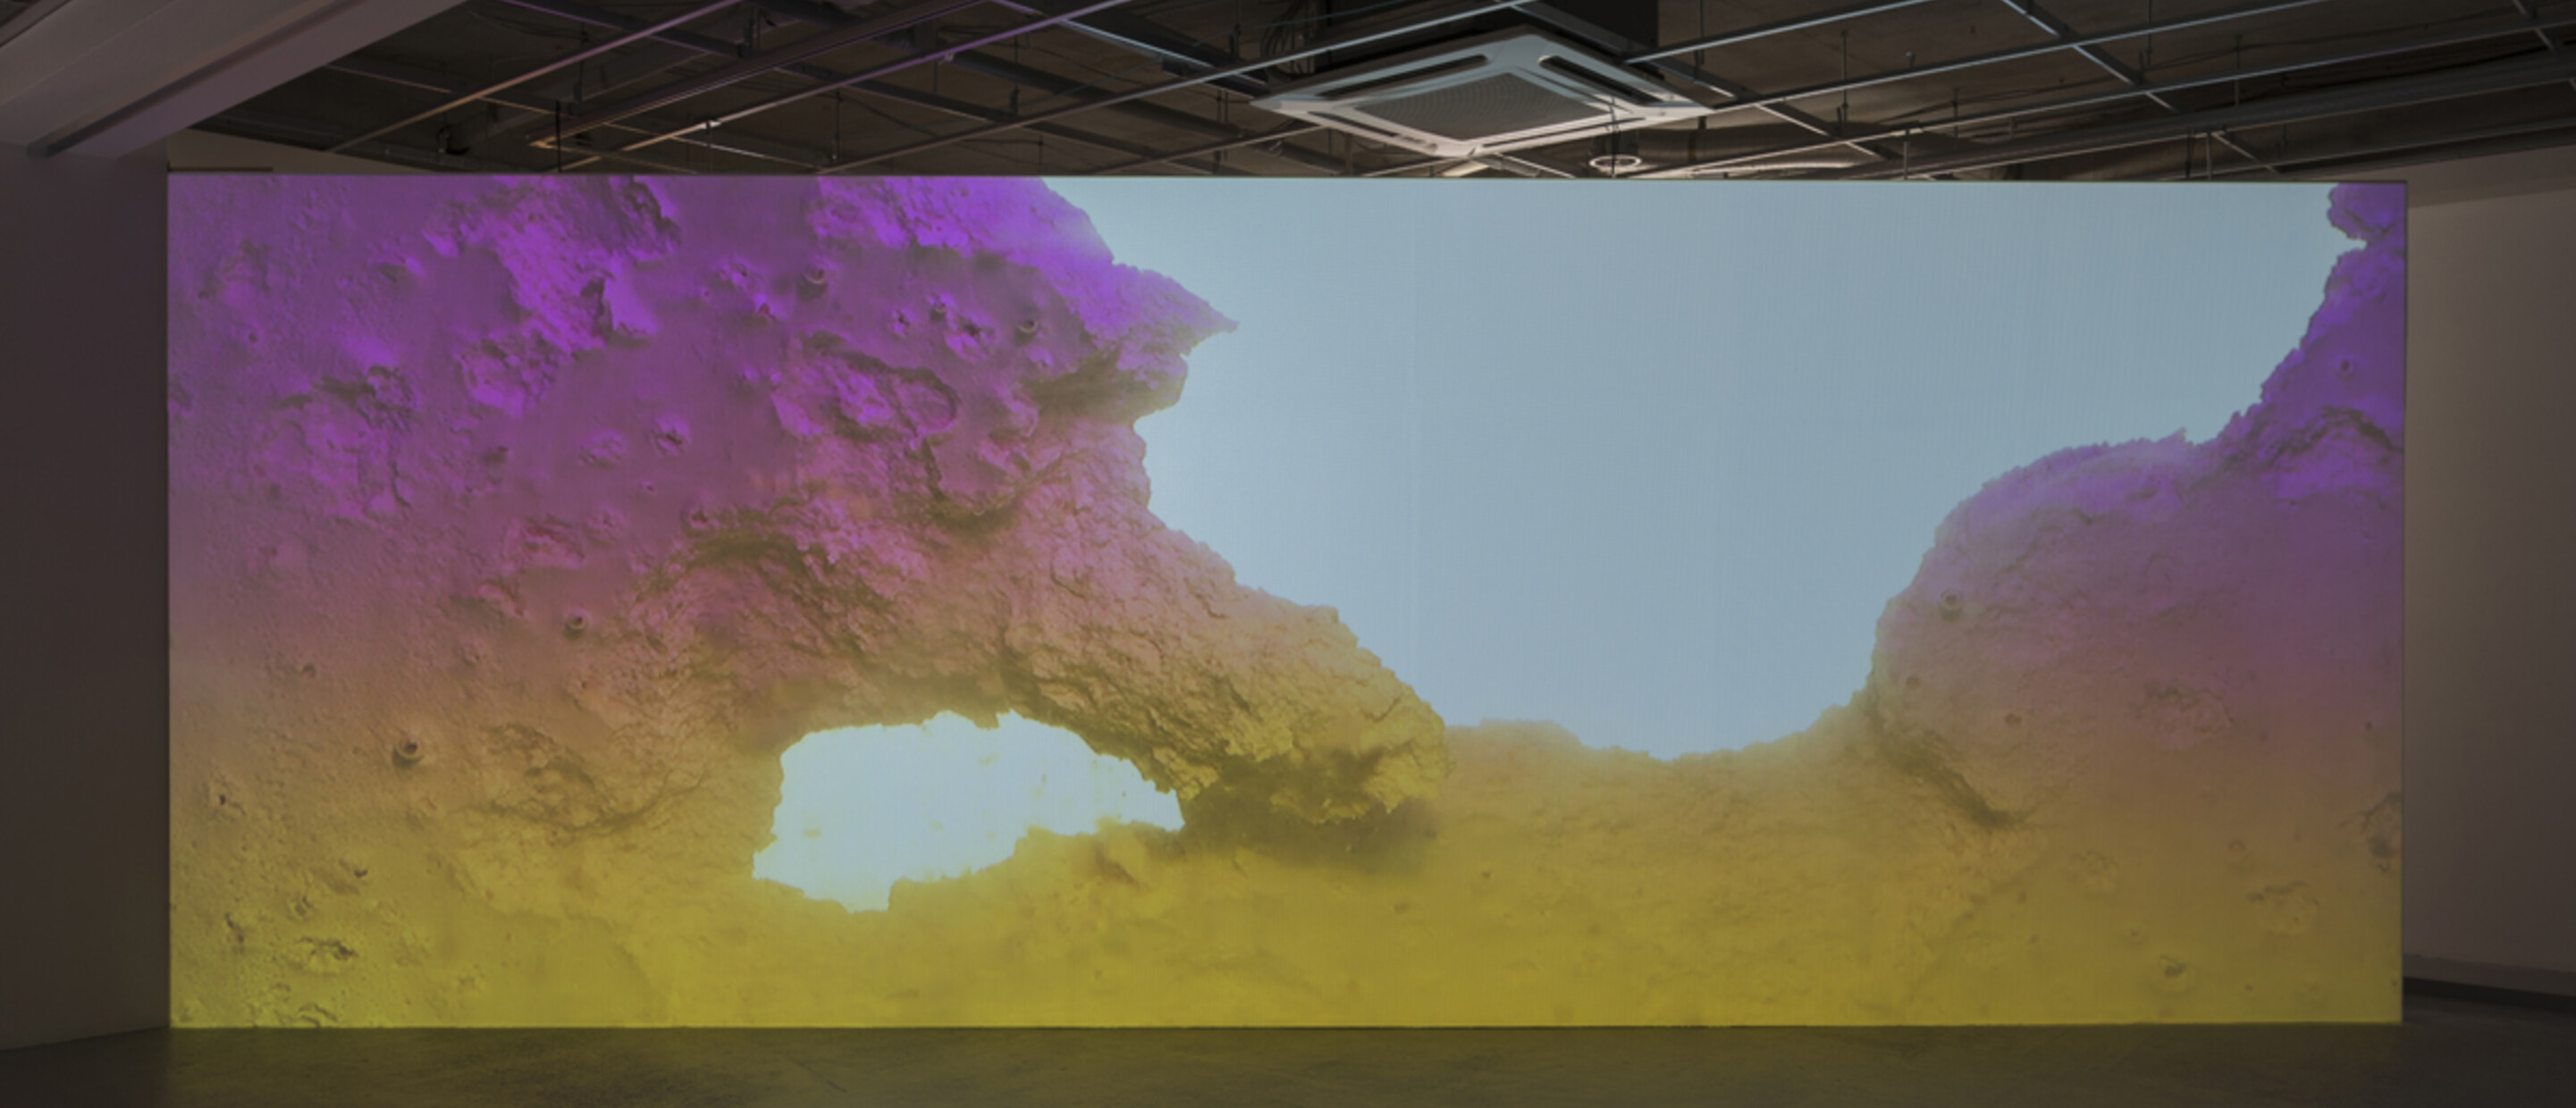 Video installation showing image of geological like landscape in gallery